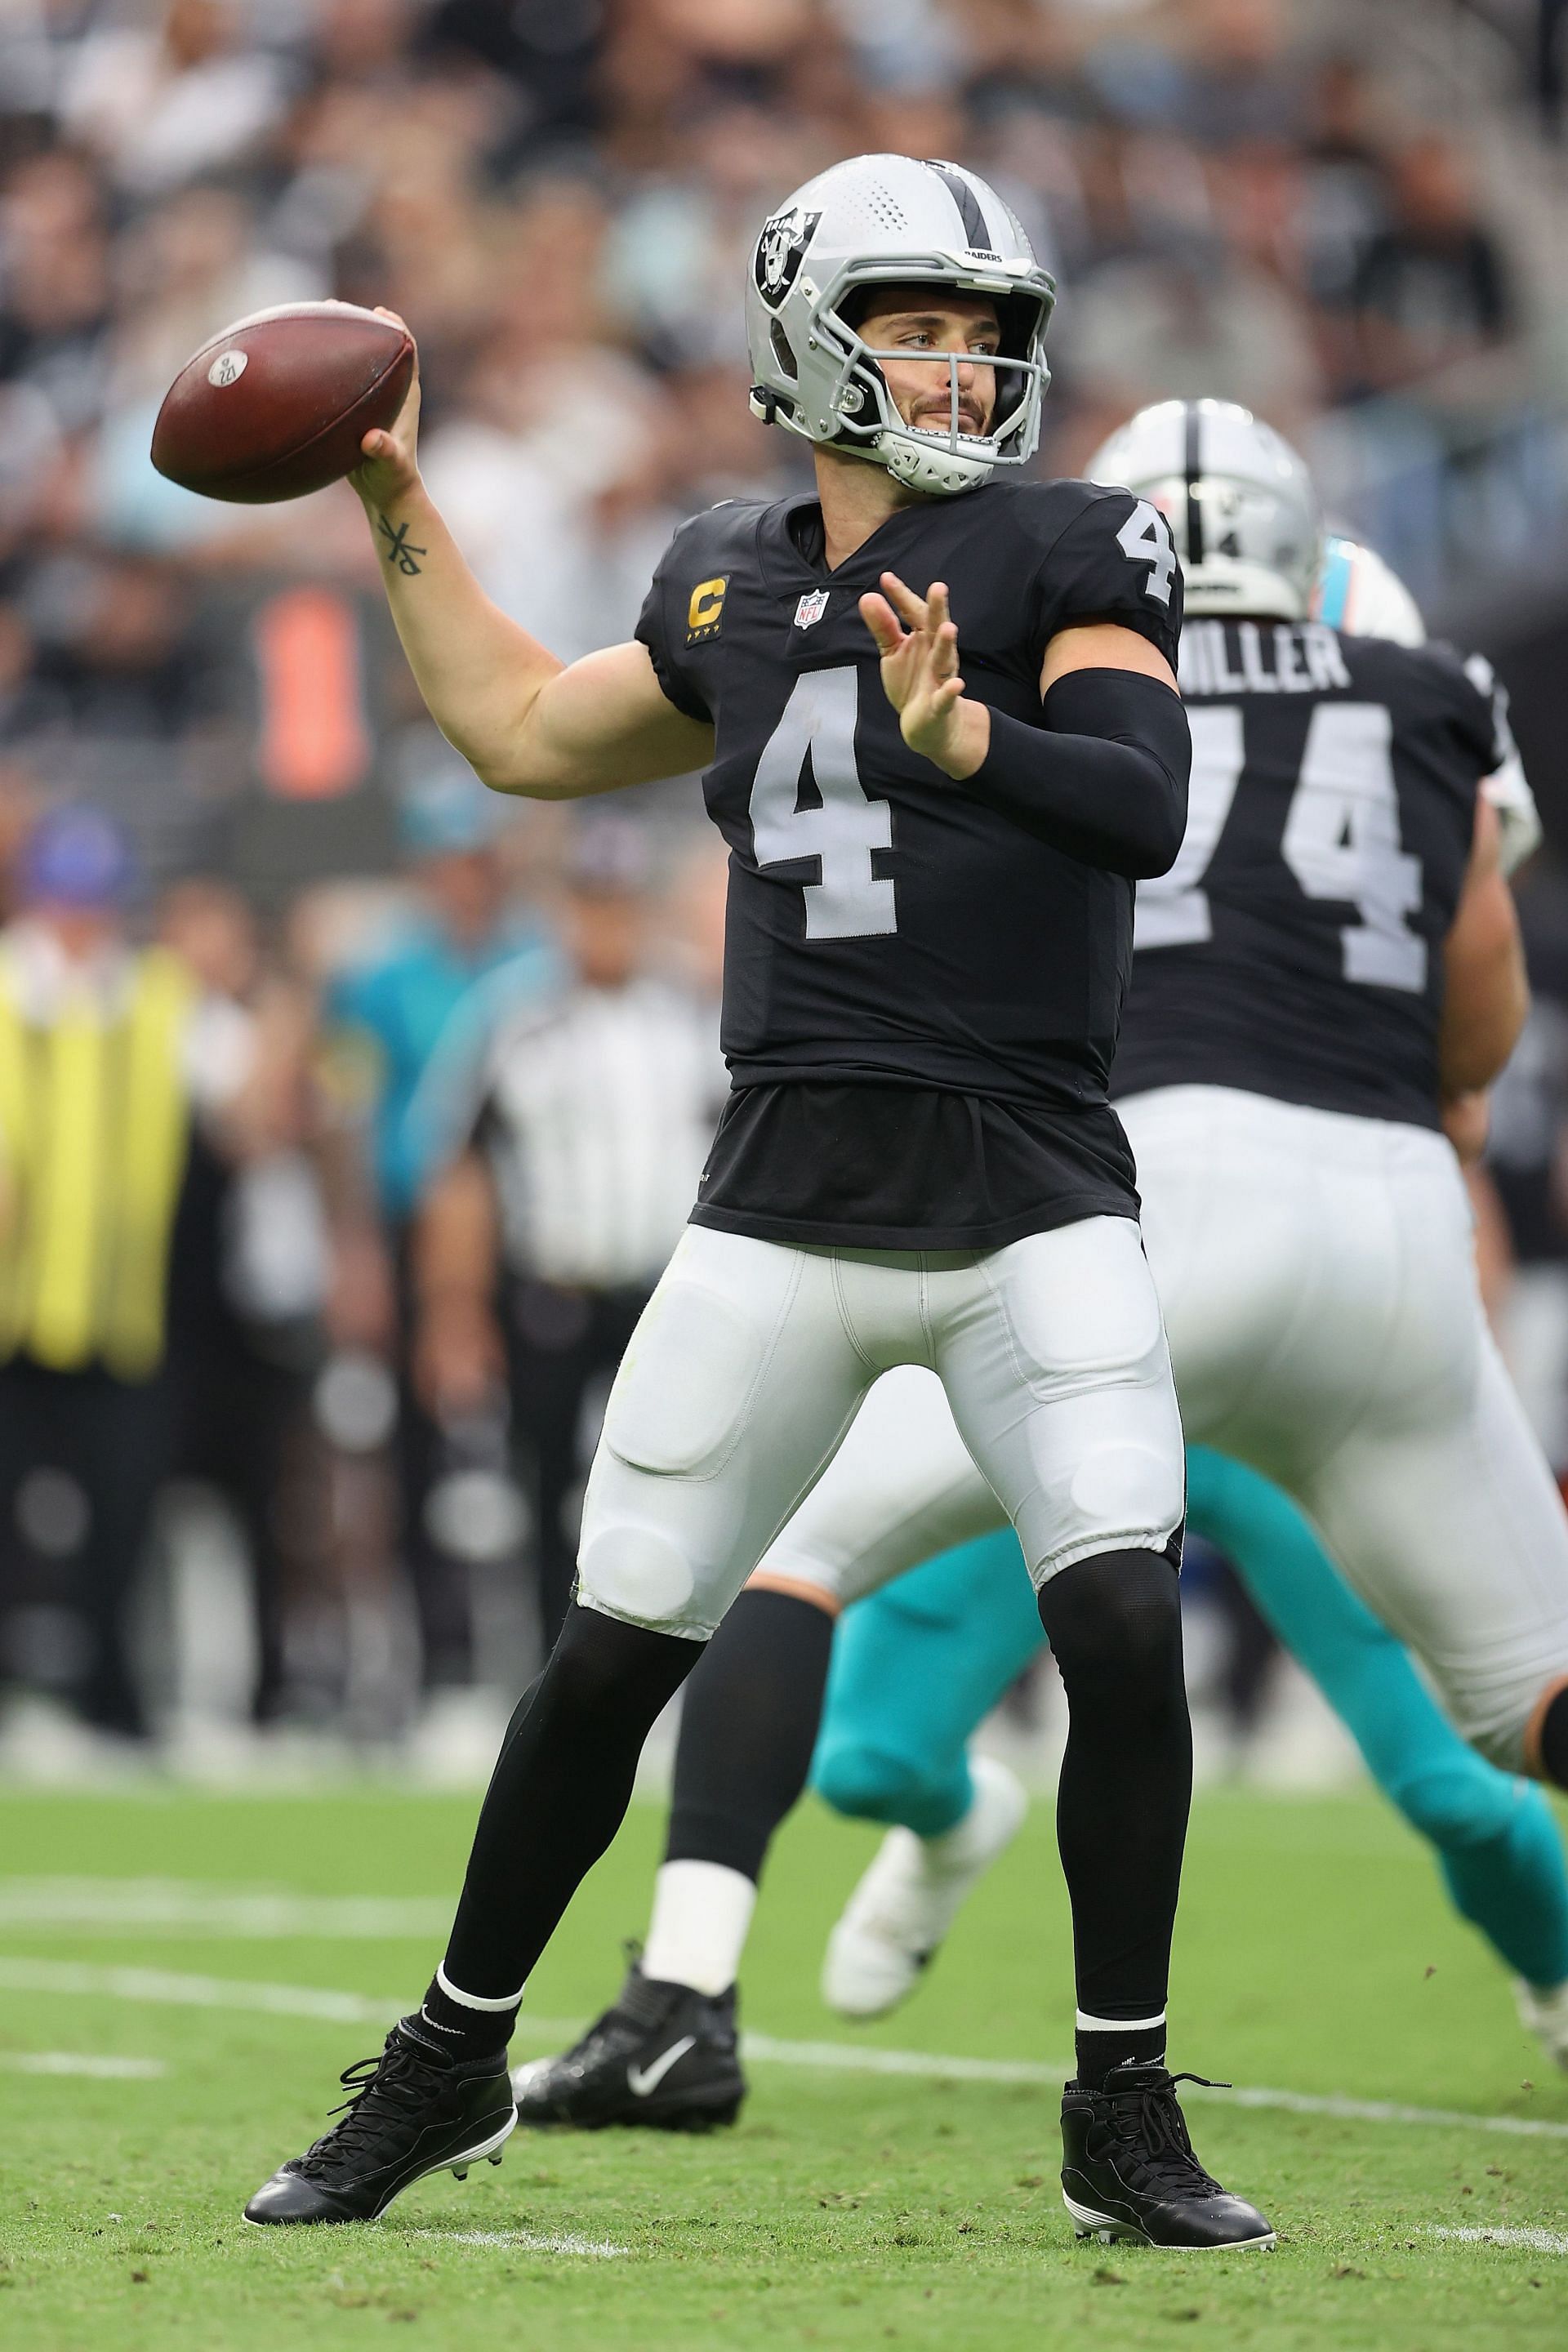 2021 NFL Preview: Raiders need to start seeing results from Jon